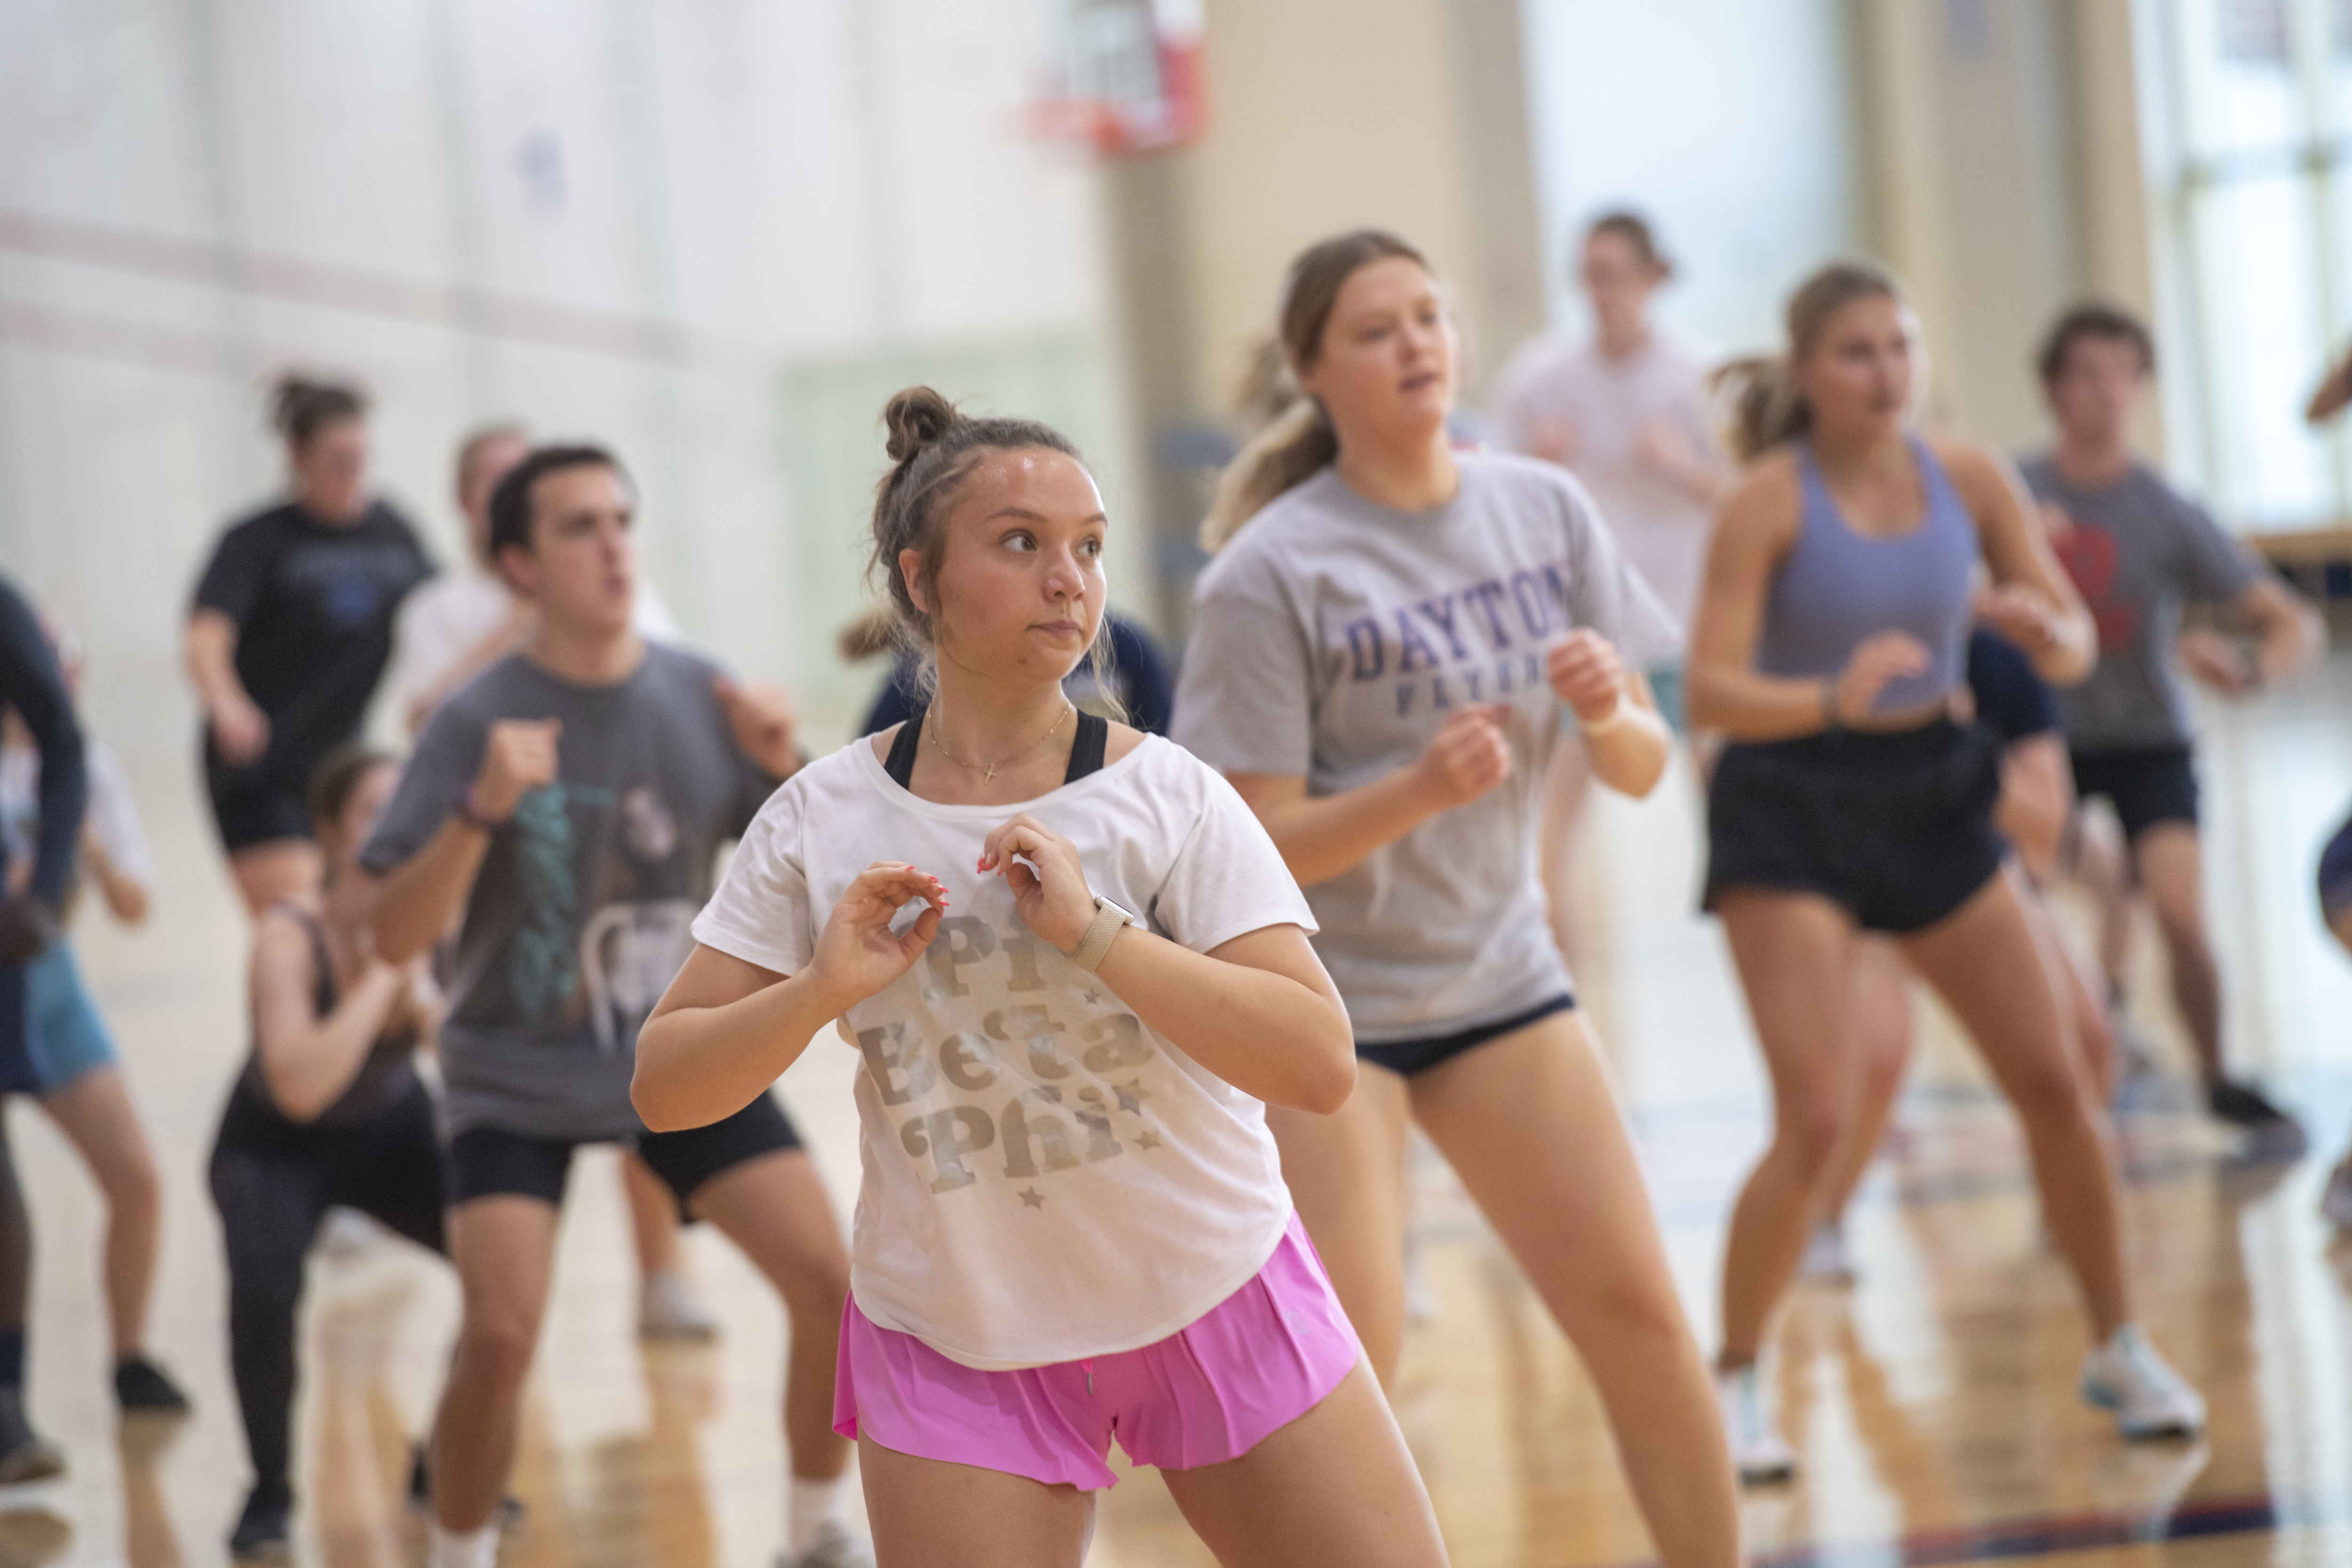 Patrons focused in a large group fitness class offered working to make students active.